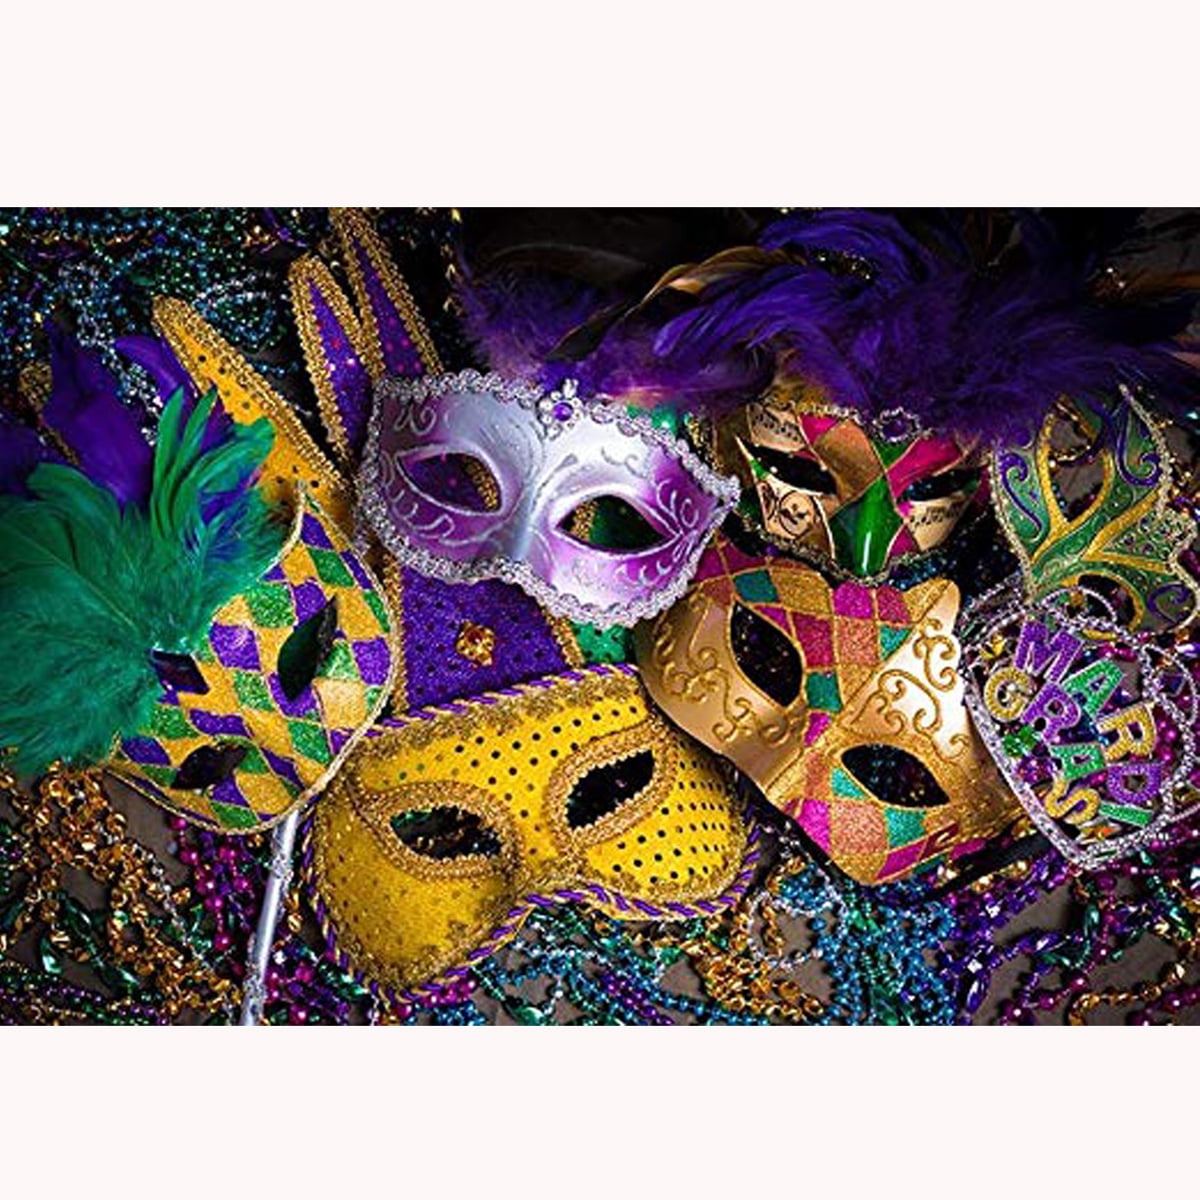 7x10 FT Mardi Gras Vinyl Photography Backdrop,Traditional Holiday Theme Colorful Fluffy Feathers Mask Crown Symbol Background for Party Home Decor Outdoorsy Theme Shoot Props 